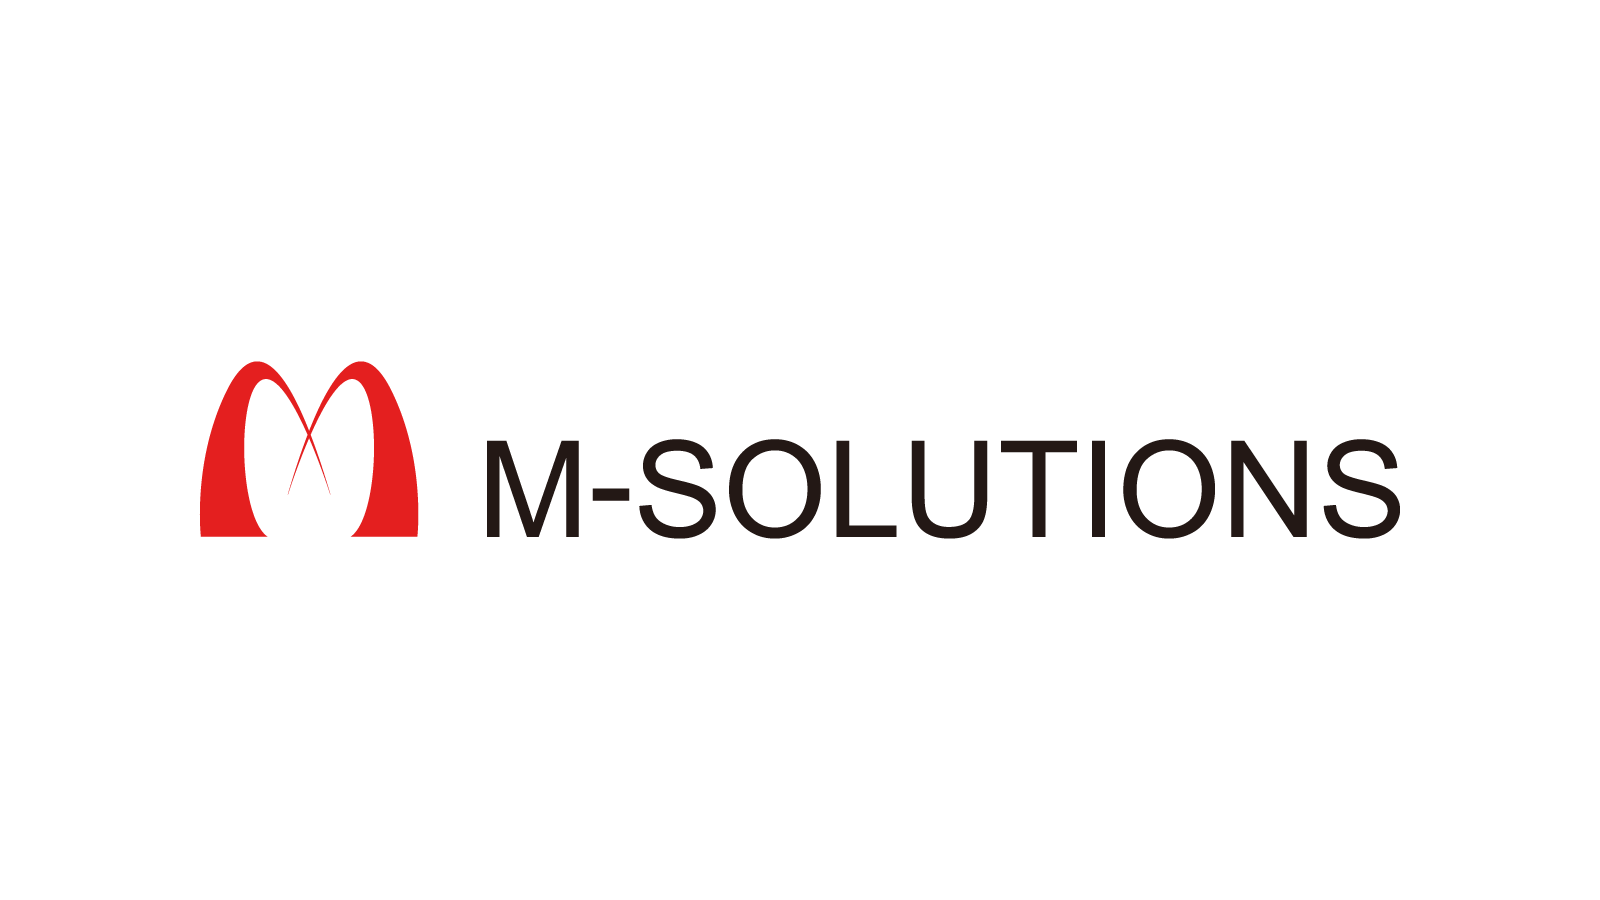 M-SOLUTIONSロゴ